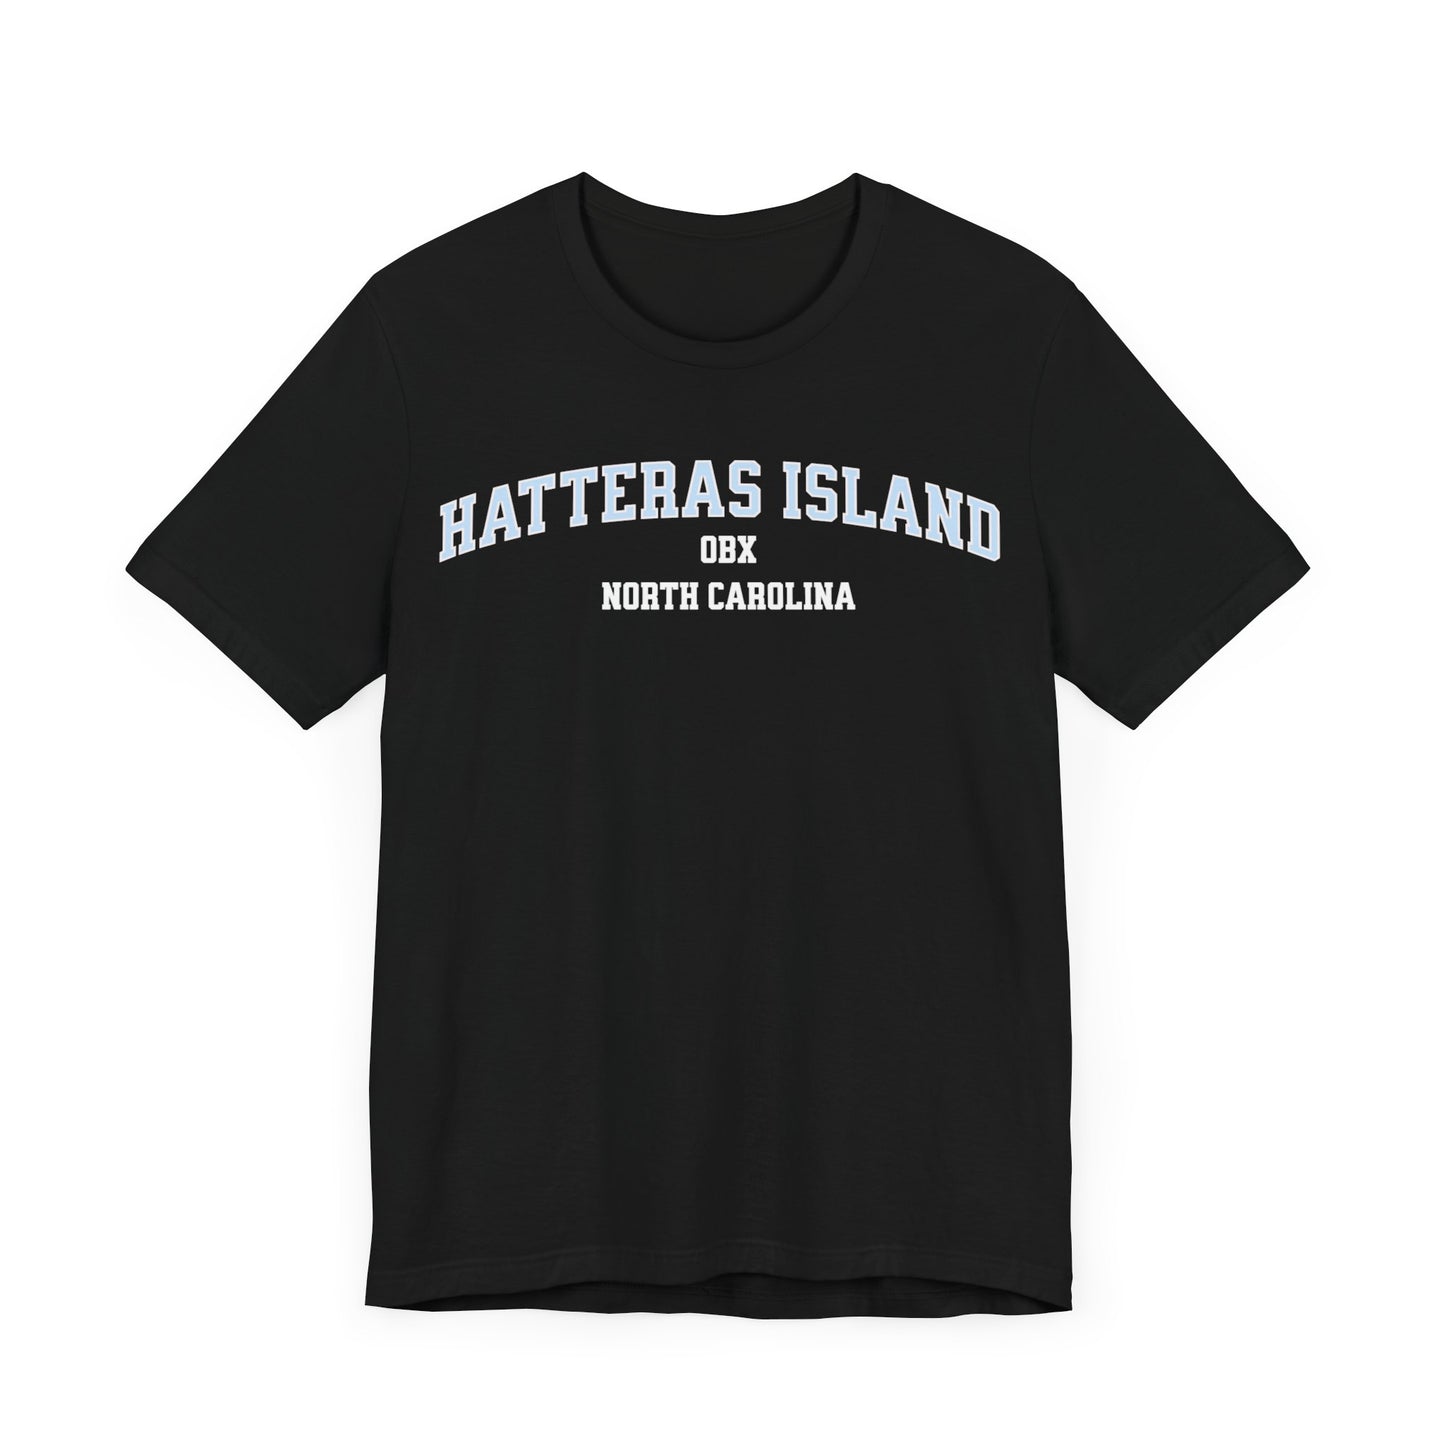 Hatteras Island Outer Banks T-Shirt